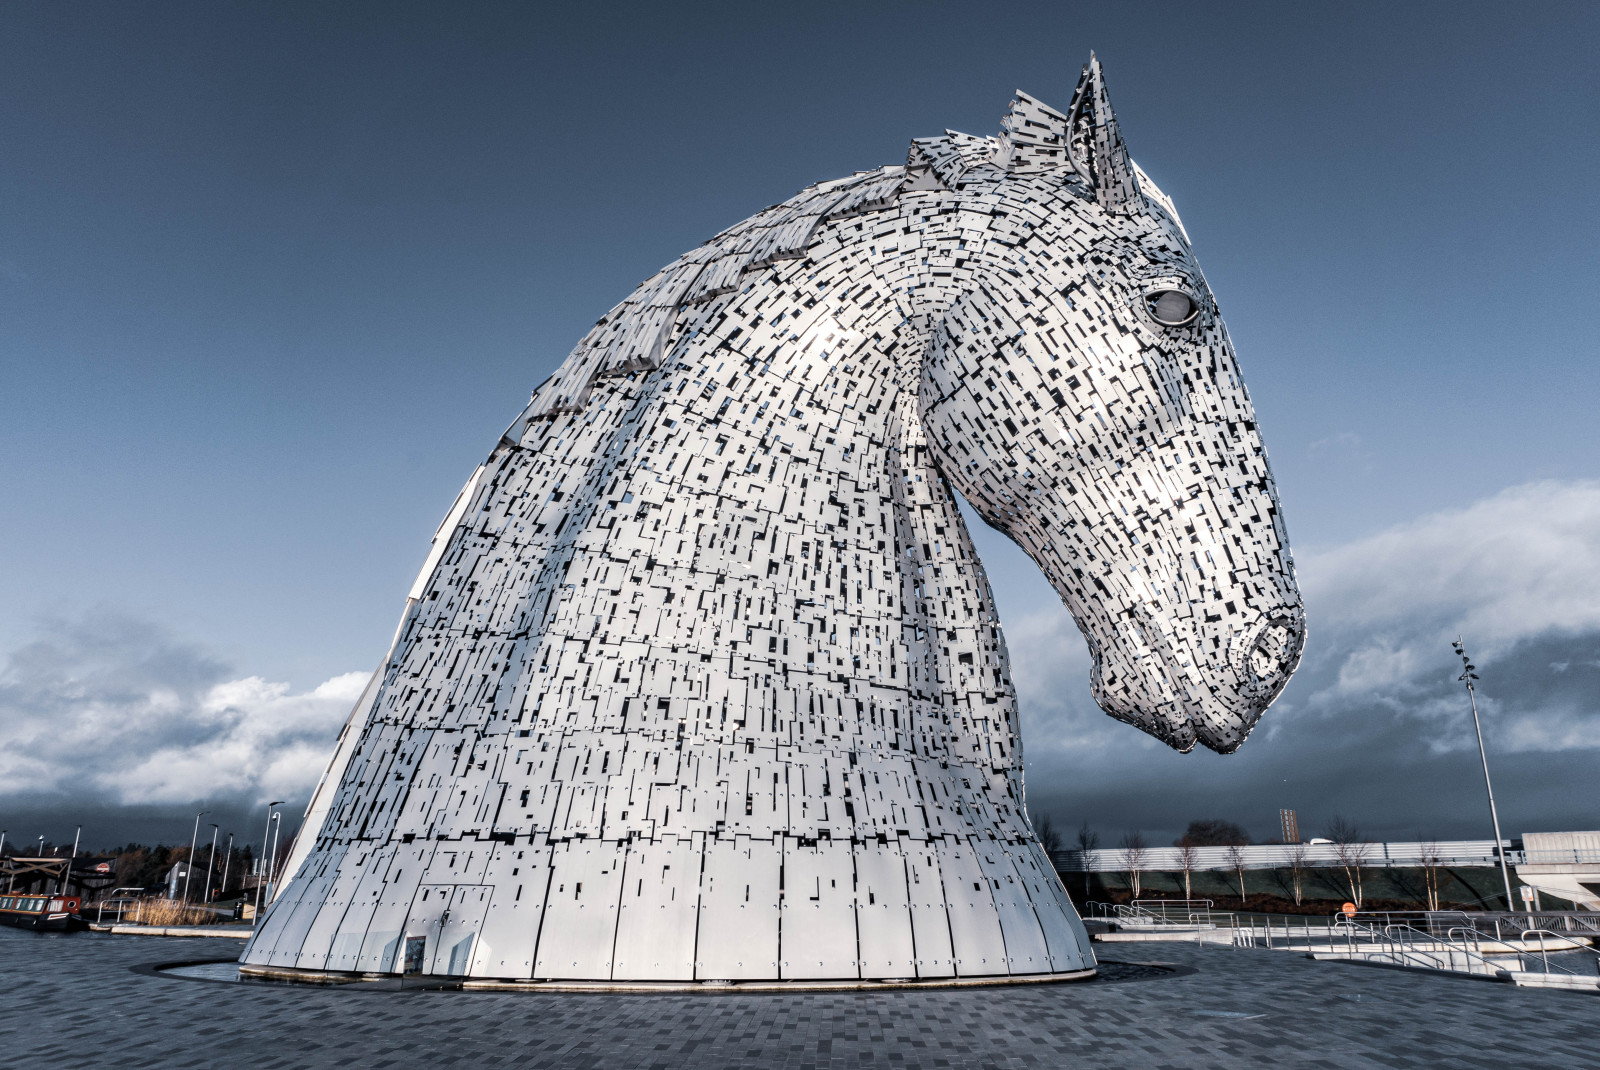 A giant white and silver horse head statue with a dark sky and black stone called the Kelpies in Scotland.